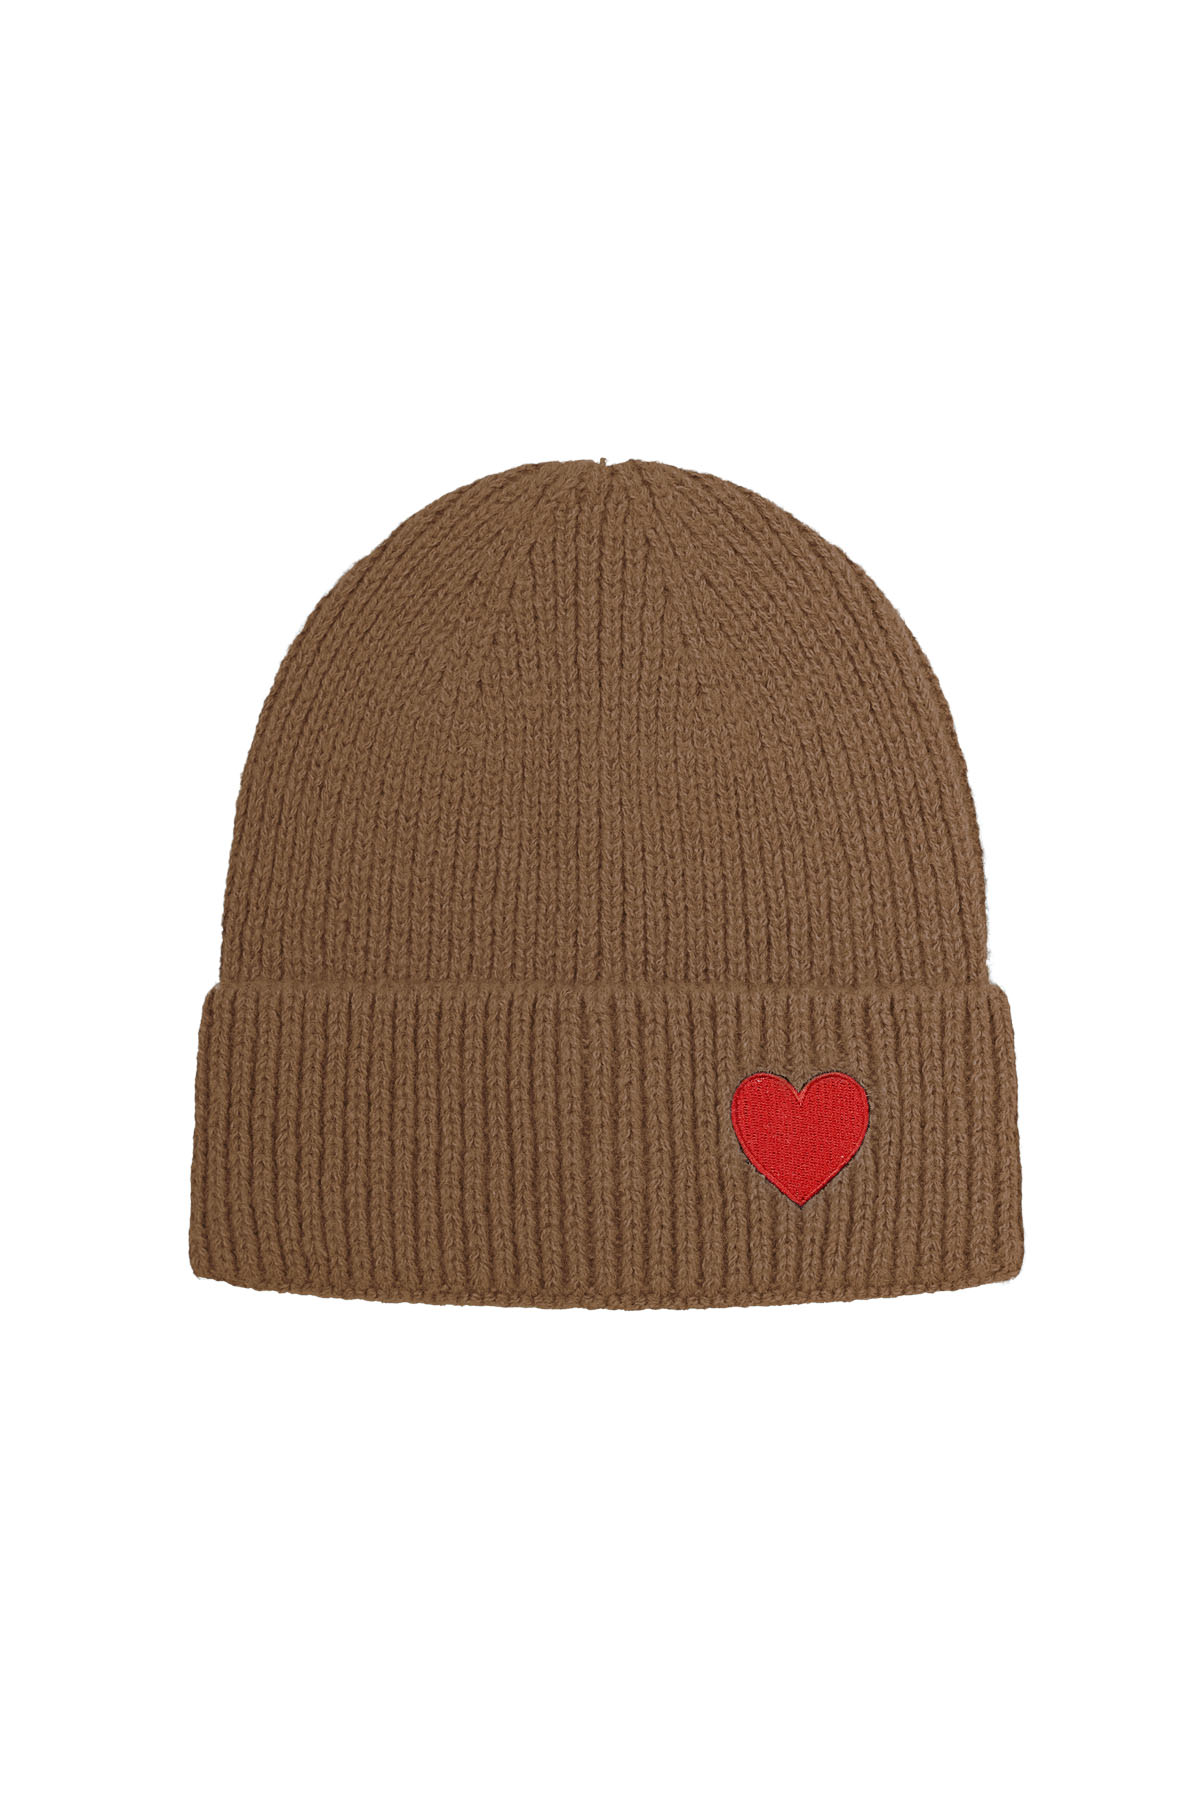 Hat with heart detail - camel